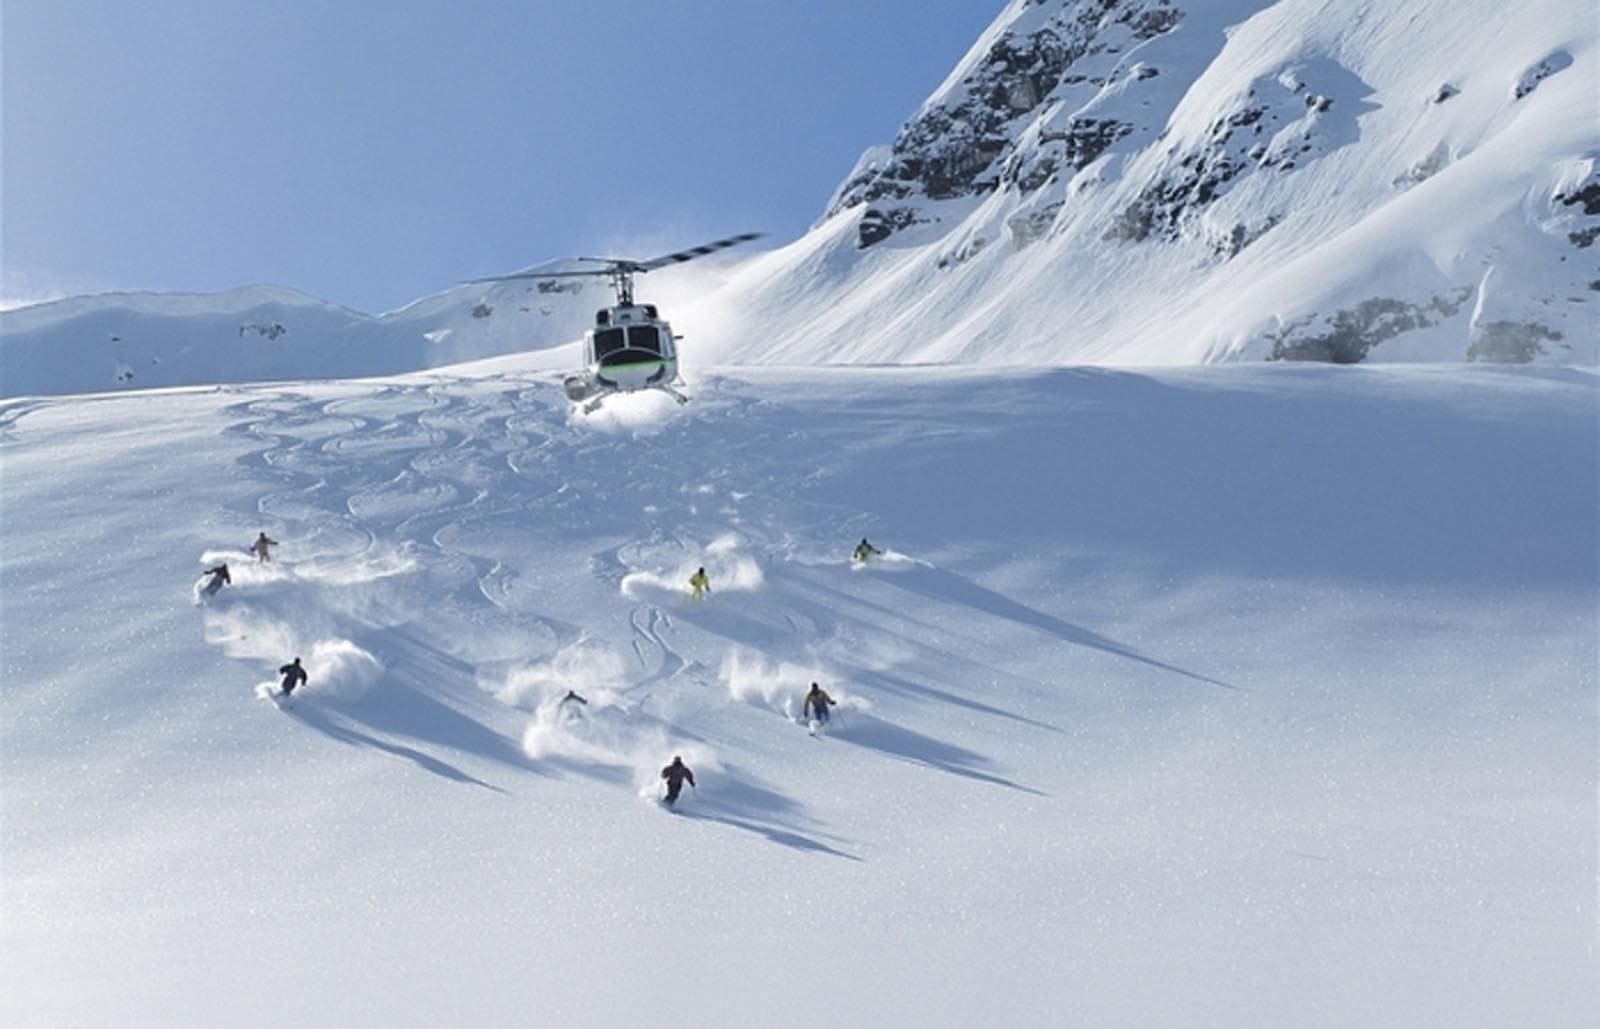 A panorama of skiers skiing through fresh powder snow with a helicopter flying above them